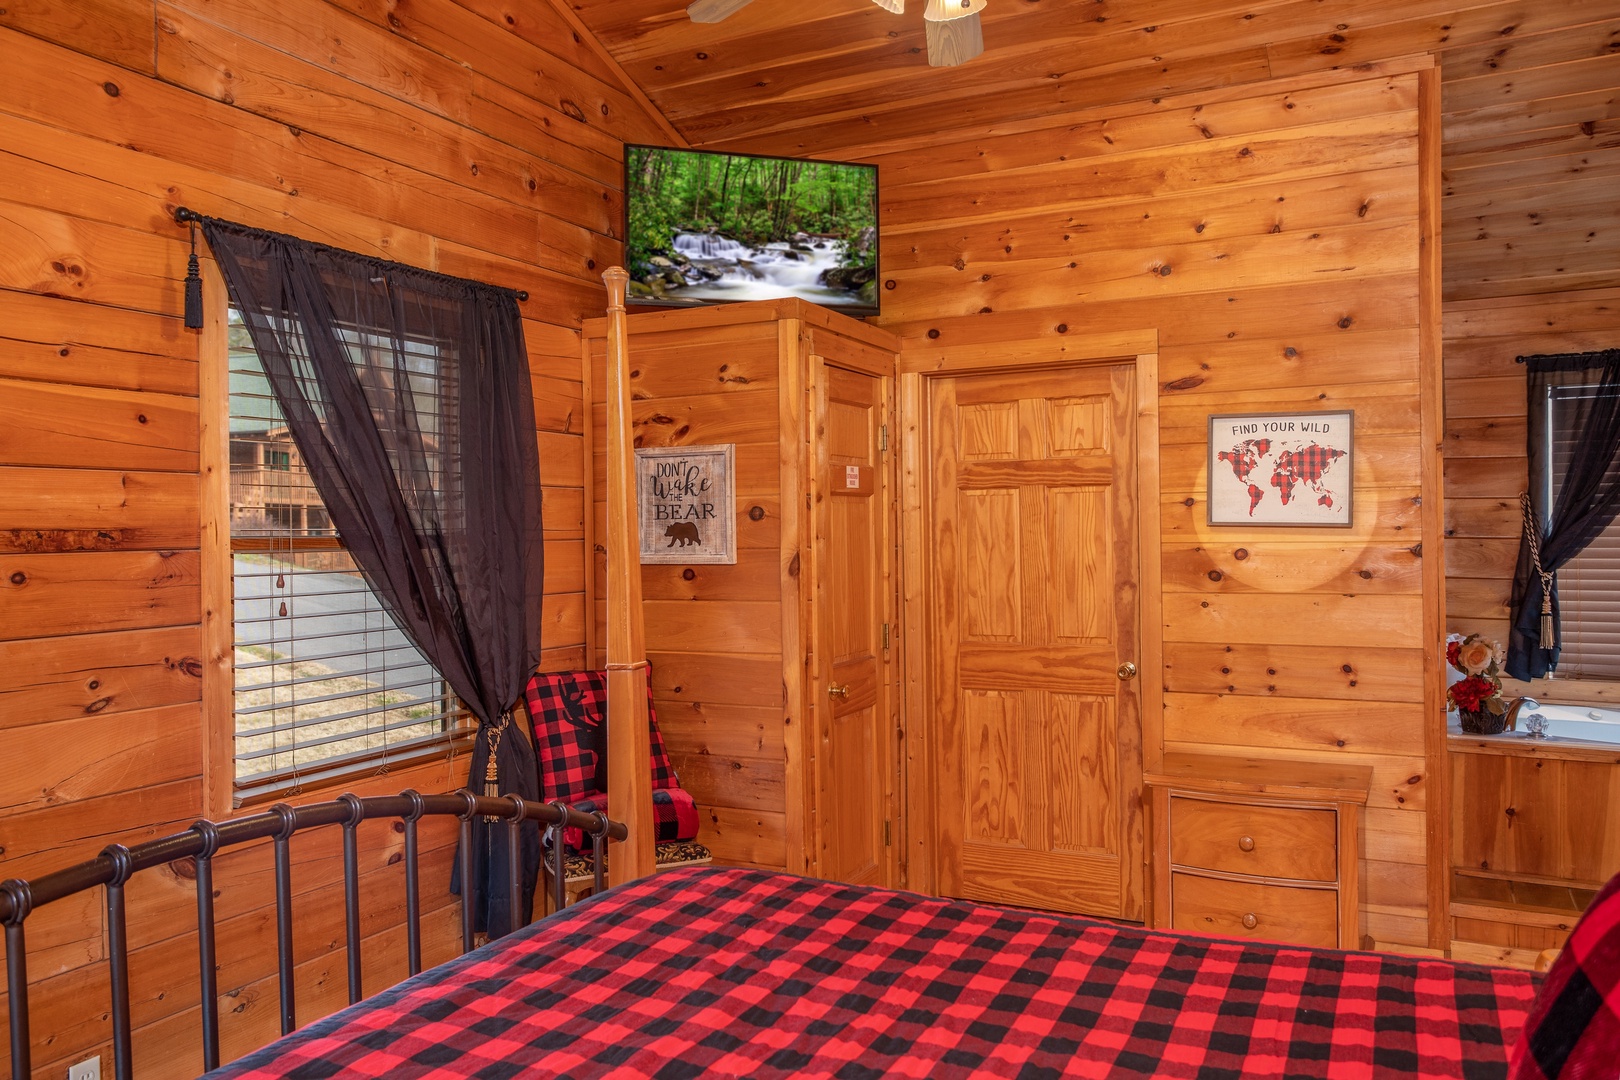 Bedroom with a television and in-room jacuzzi at Hibernation Station, a 3-bedroom cabin rental located in Pigeon Forge